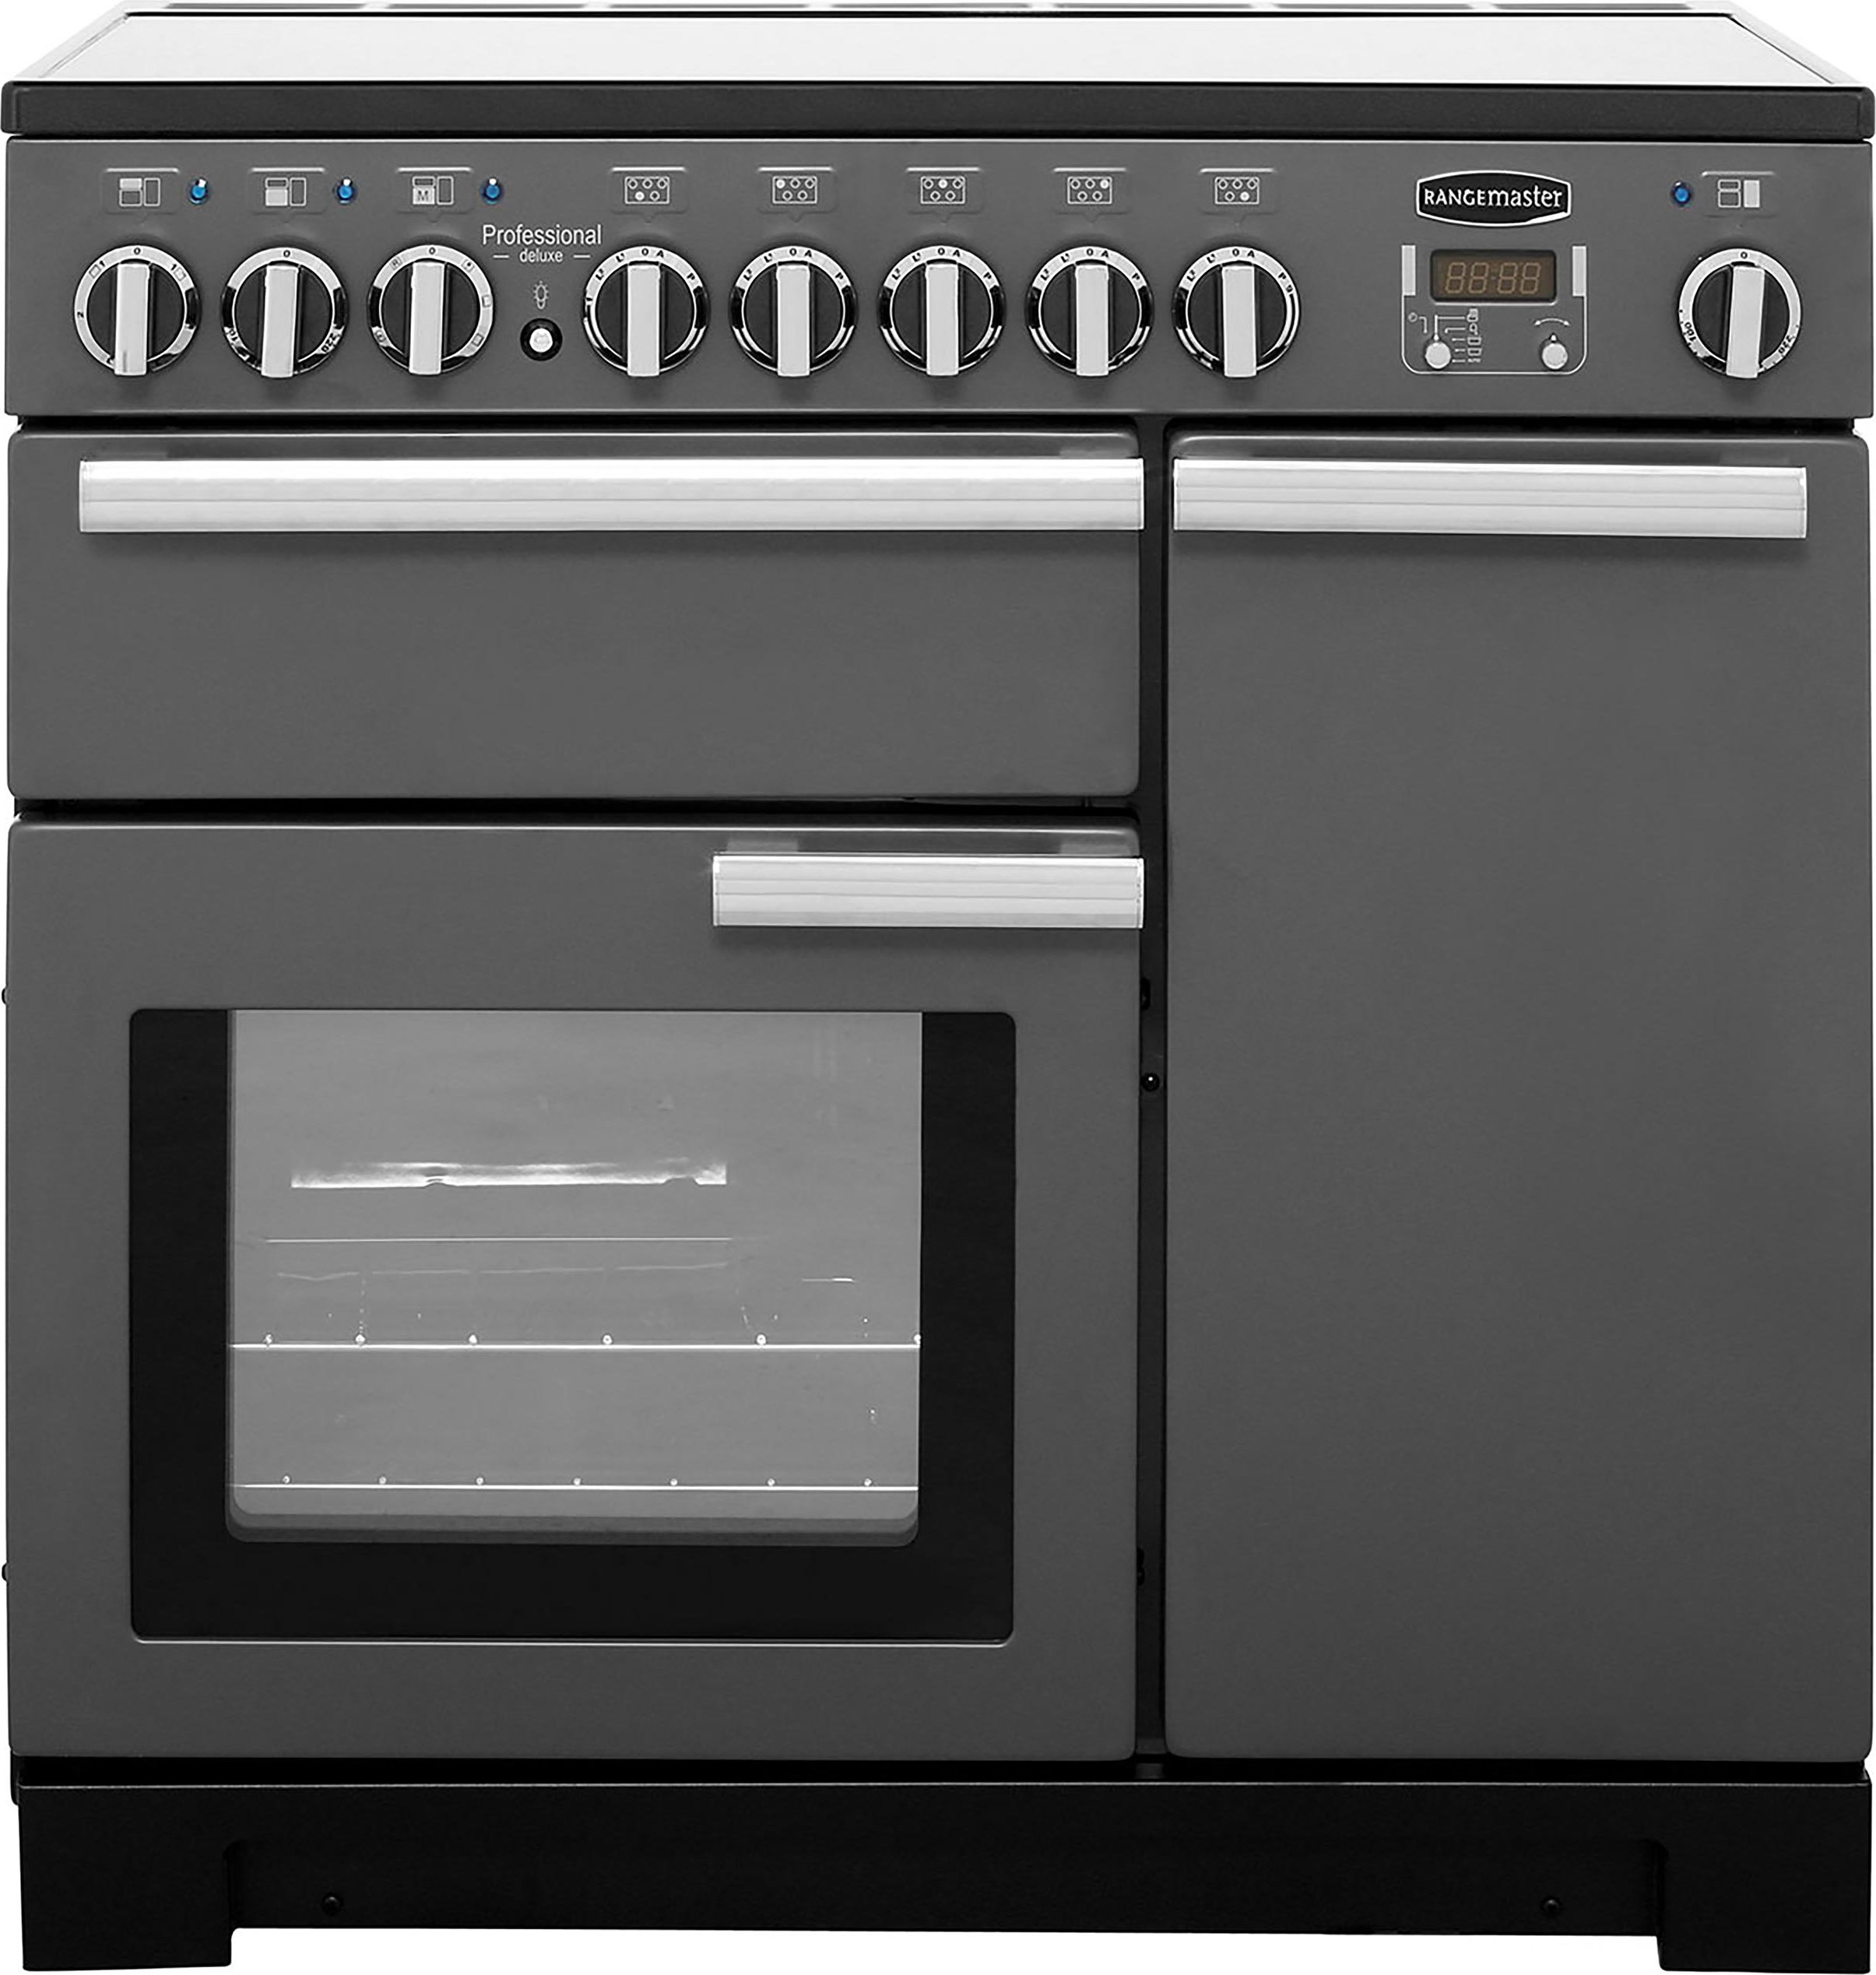 Rangemaster Professional Deluxe PDL90EISL/C 90cm Electric Range Cooker with Induction Hob - Slate - A/A Rated, Graphite